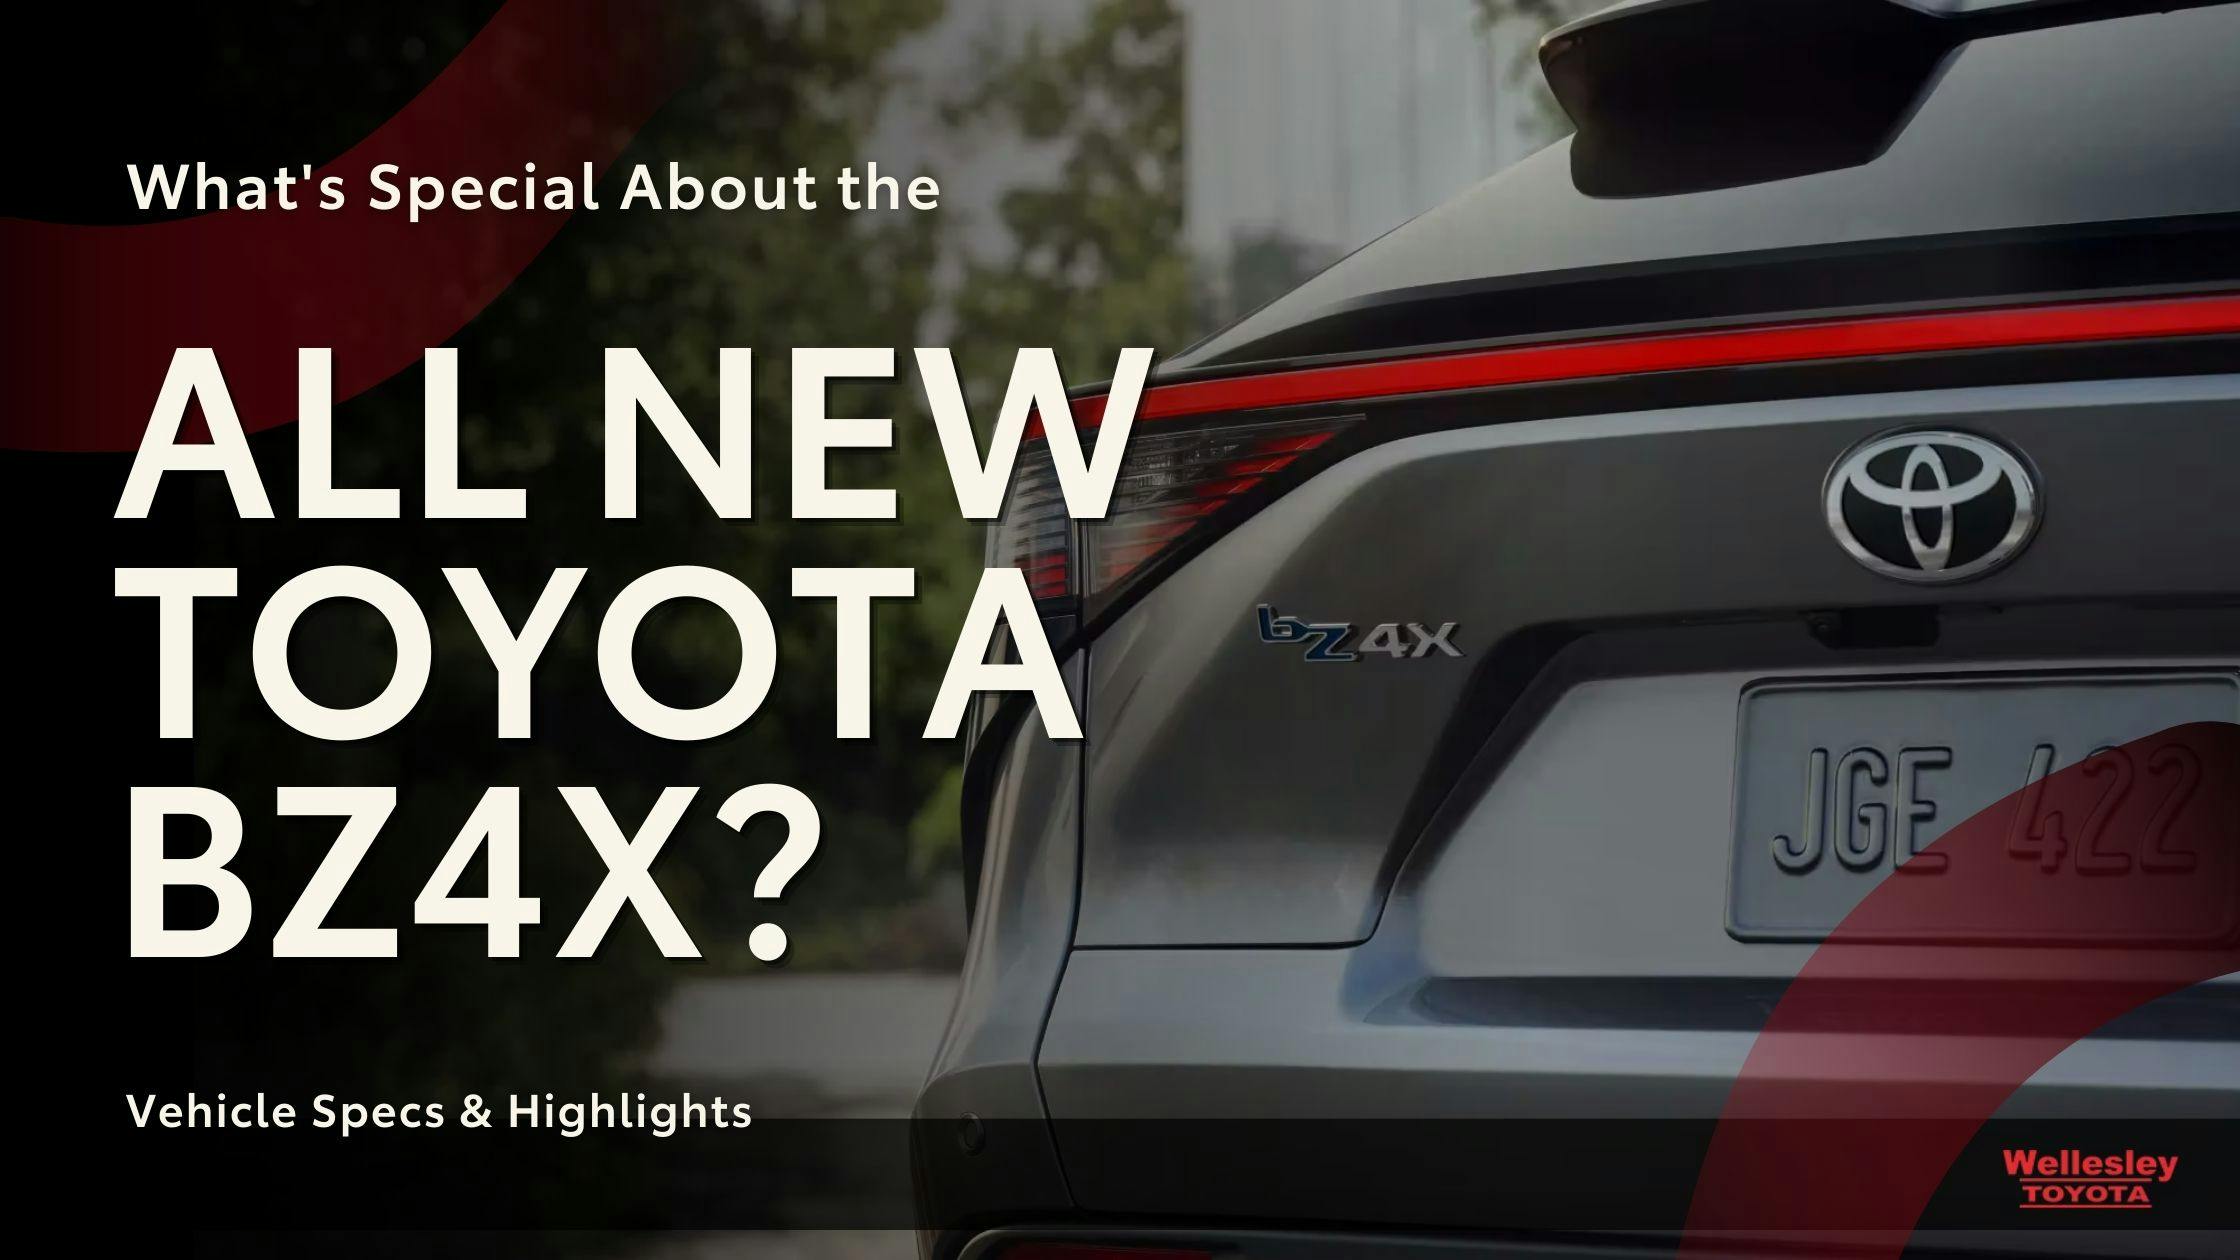 what's special about the all new Toyota BZ4x